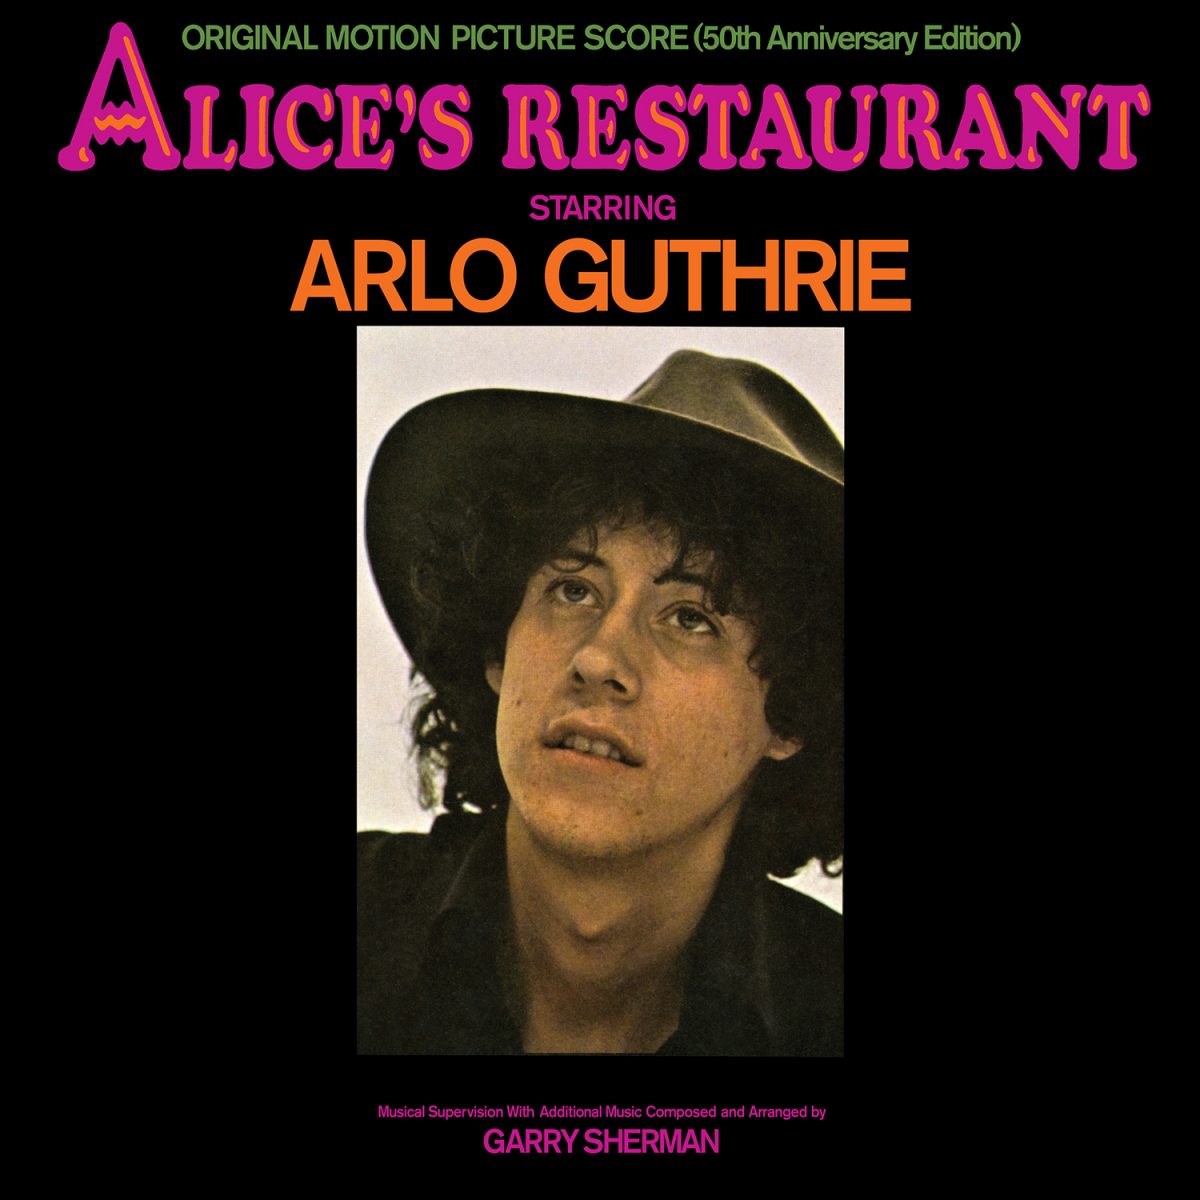 OMPS Classic Of Alice’s Restaurant With Arlo Guthrie Receives 50th